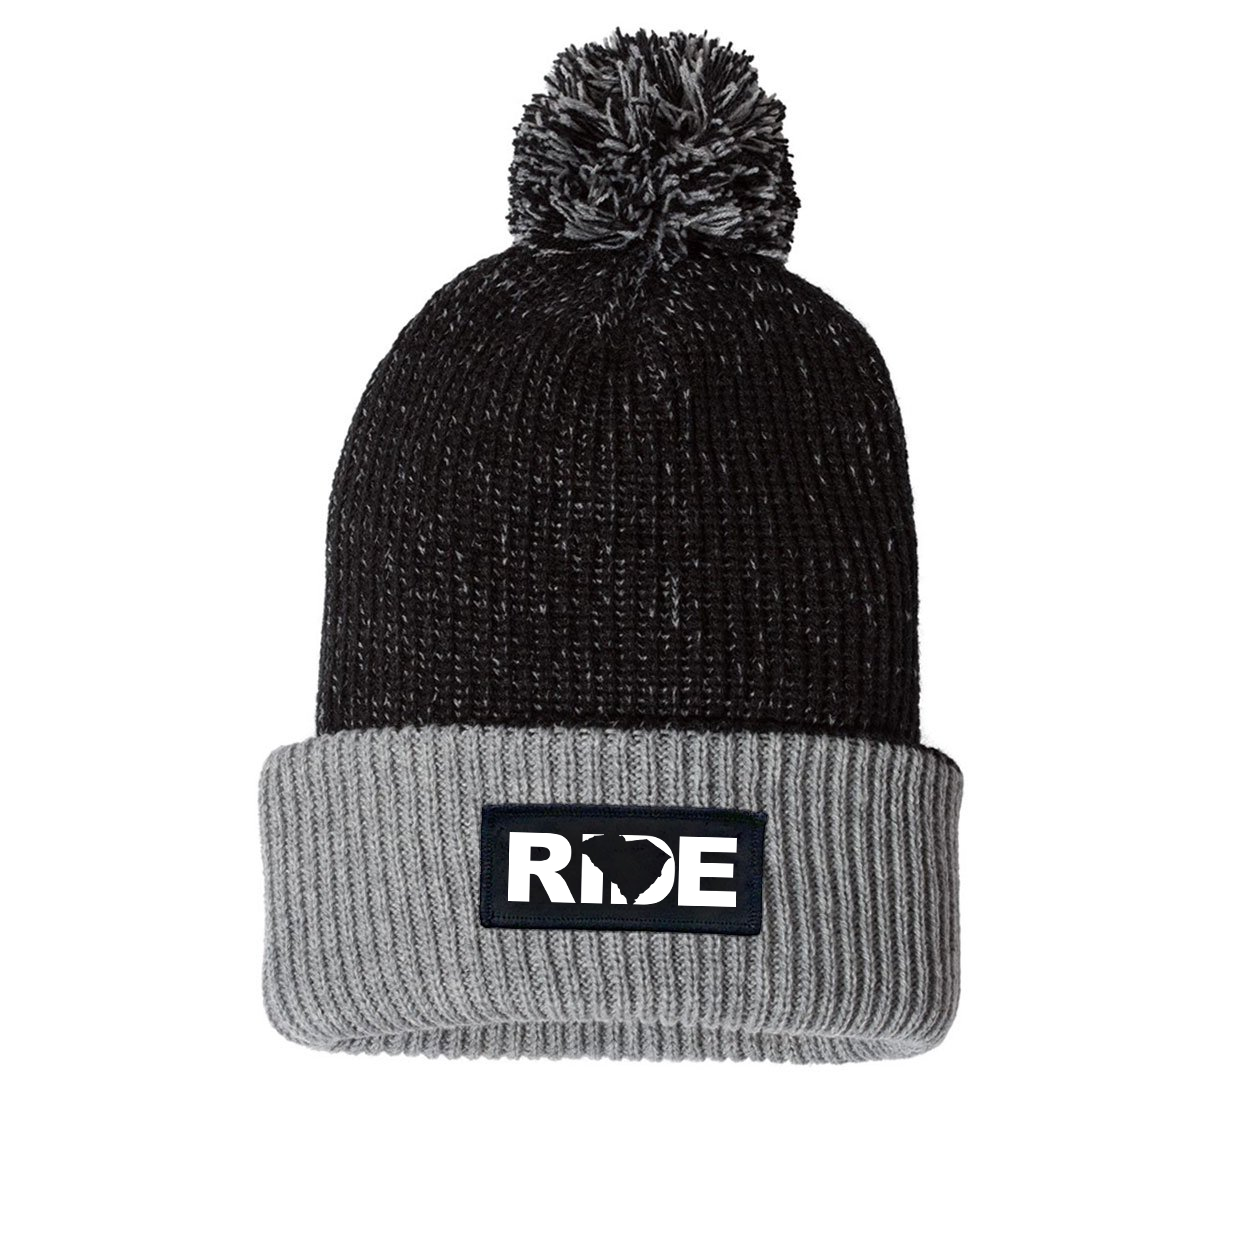 Ride South Carolina Night Out Woven Patch Roll Up Pom Knit Beanie Black/Gray (White Logo)